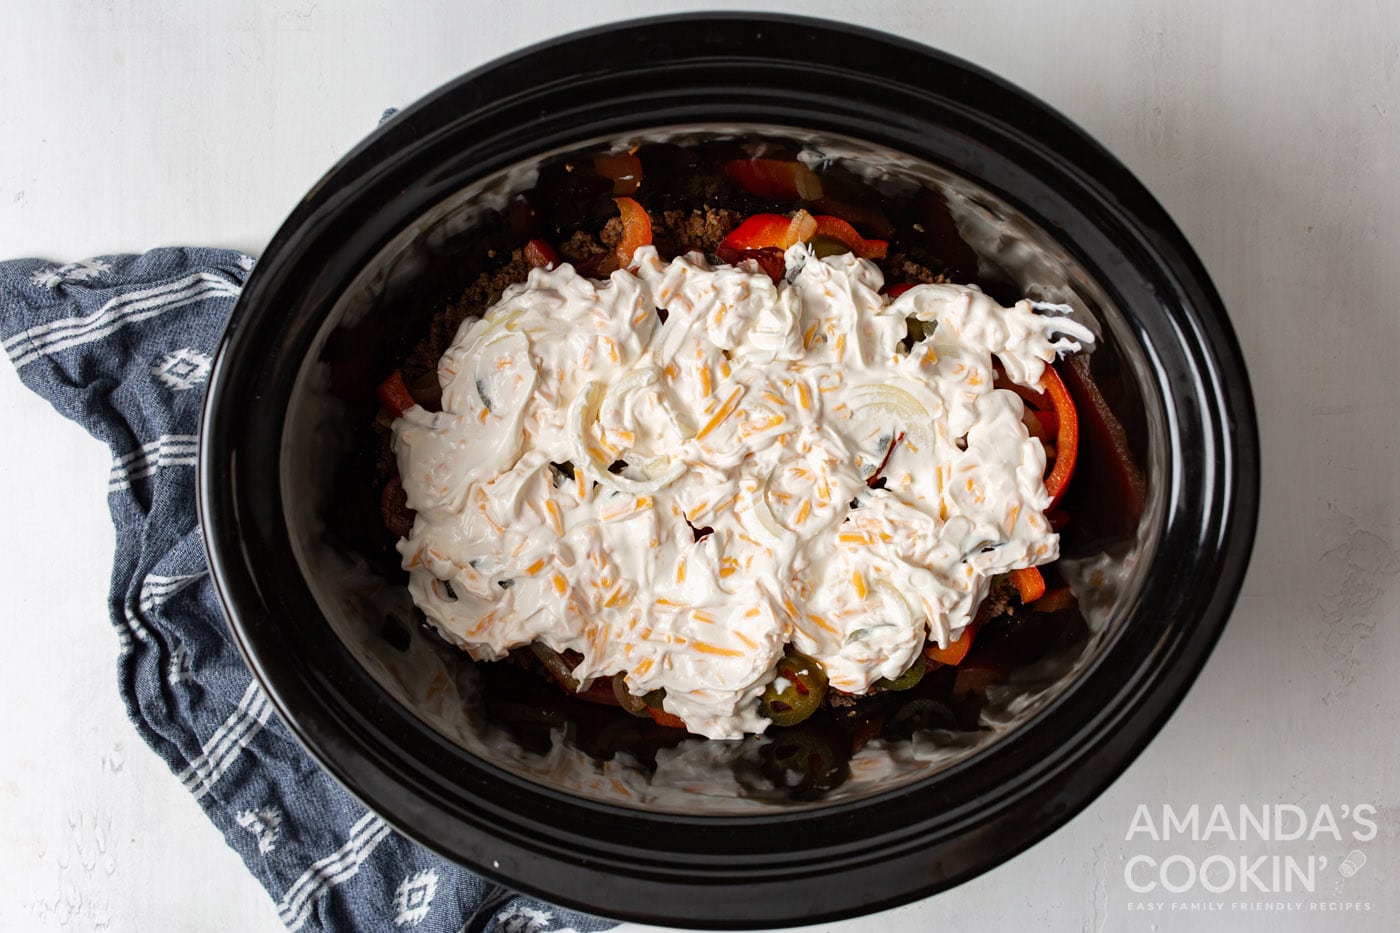 sour cream mixture on top of ground beef and veggies in slow cooker